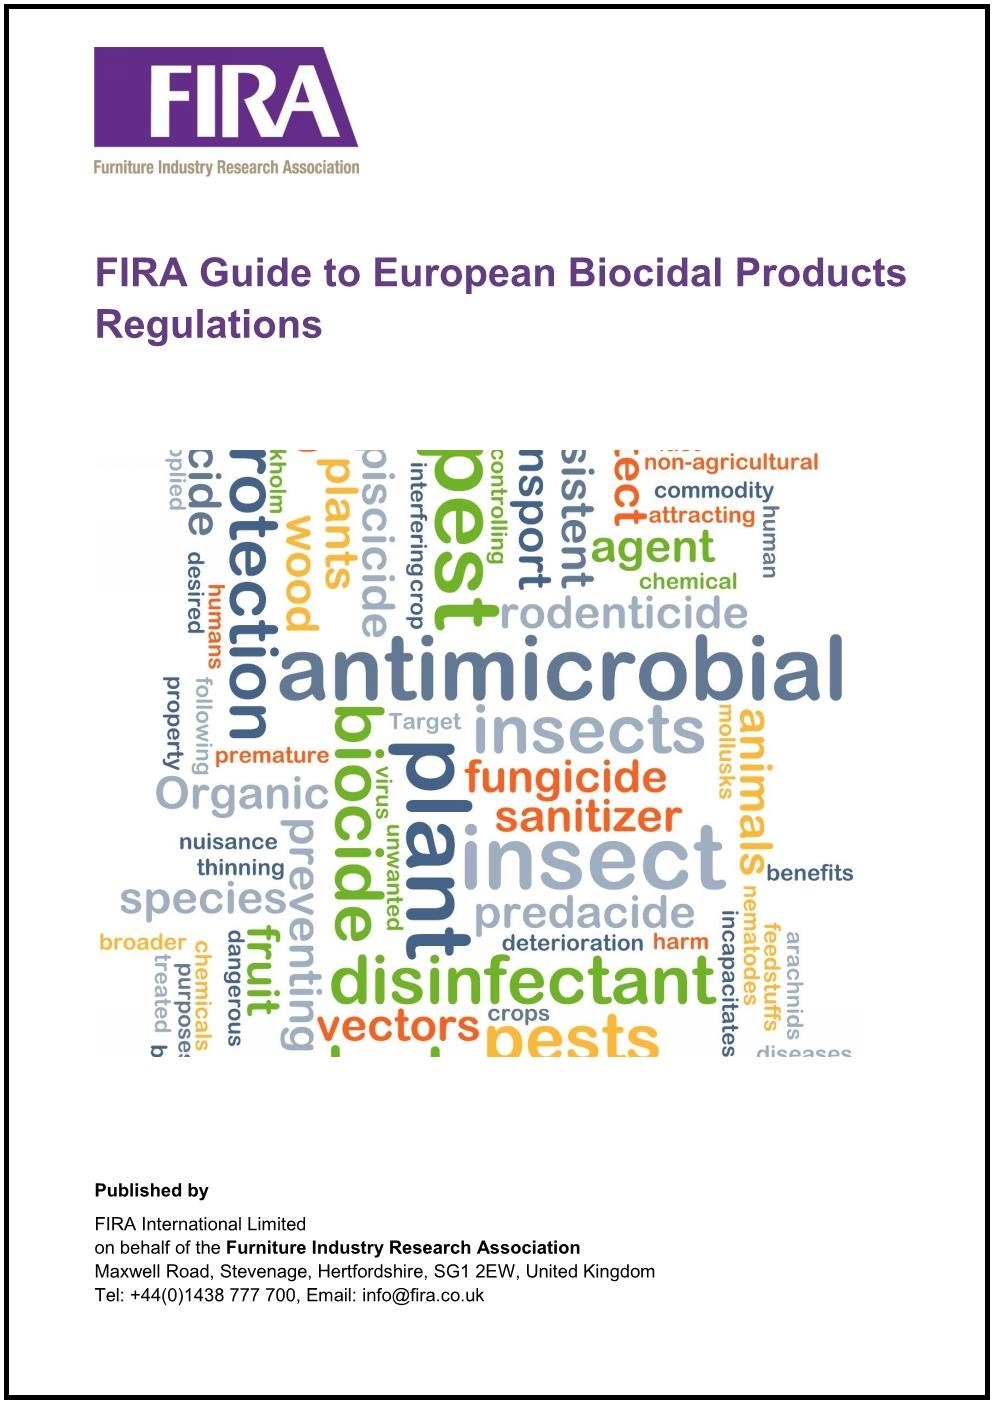 FIRA-Guide-to-Biocidal-Products-Regulations.-v1.0-1.jpg#asset:327289